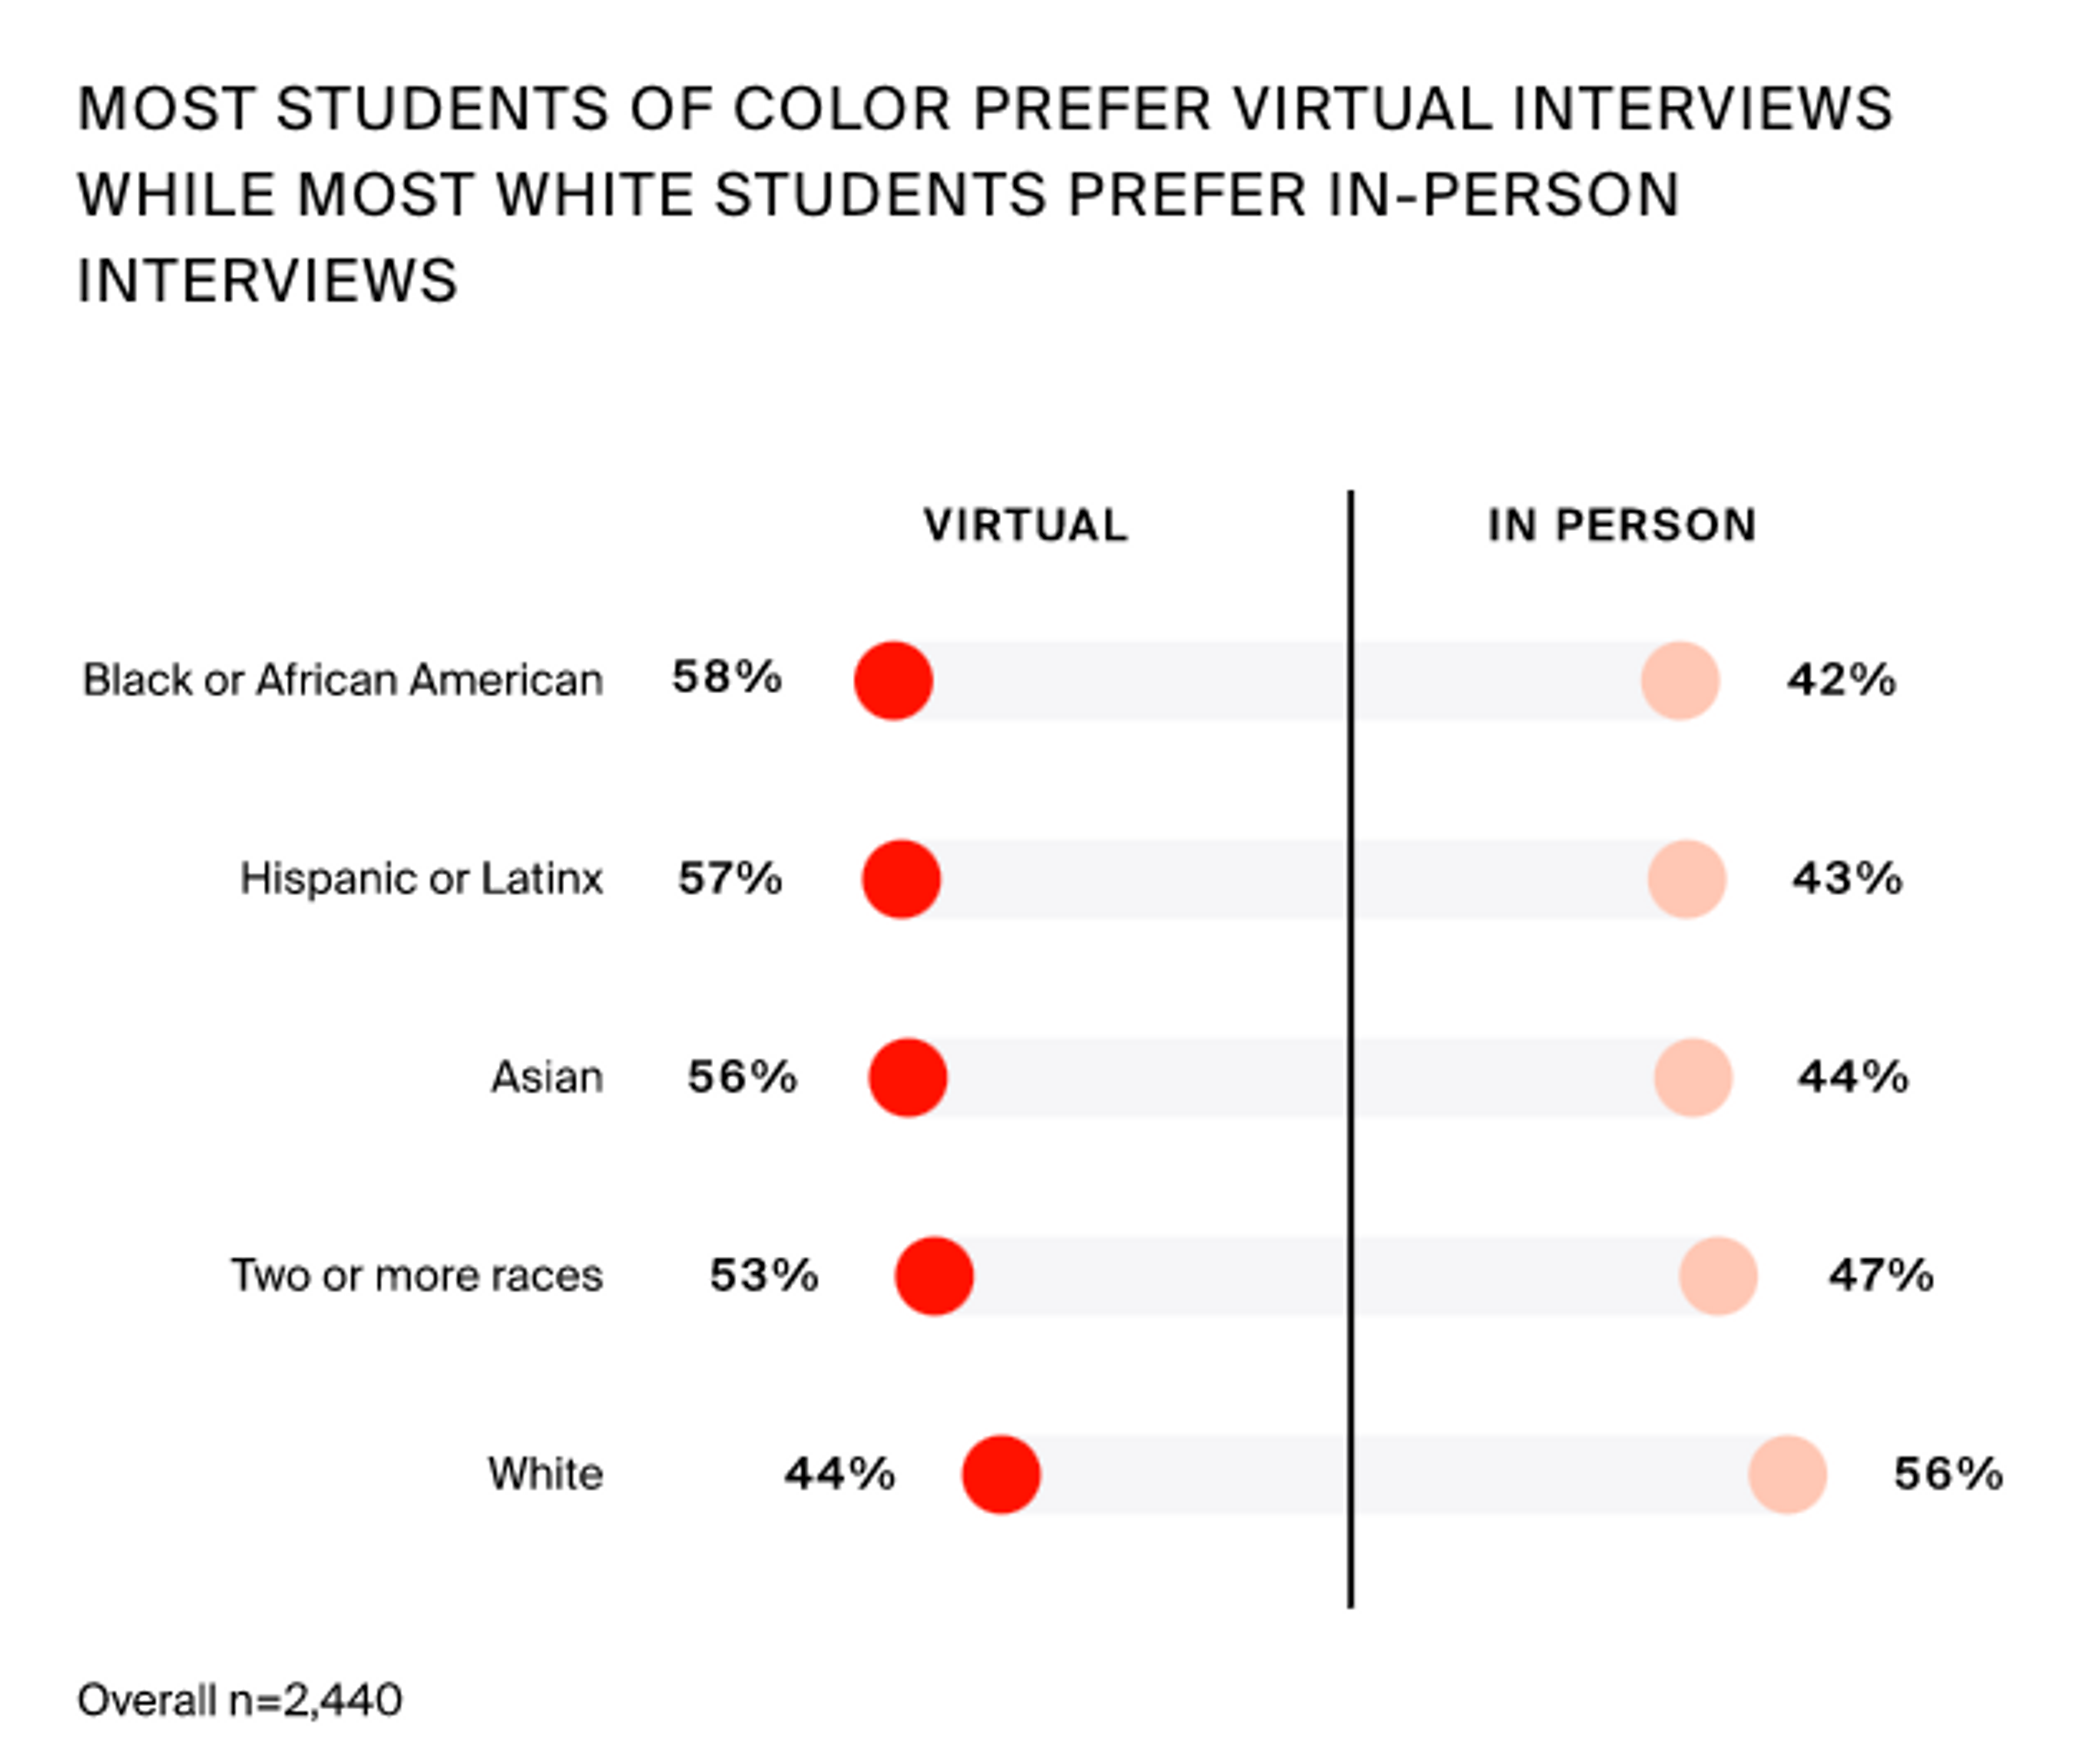 Chart showing most students of color prefer virtual interviews while most white students prefer in-person interviews